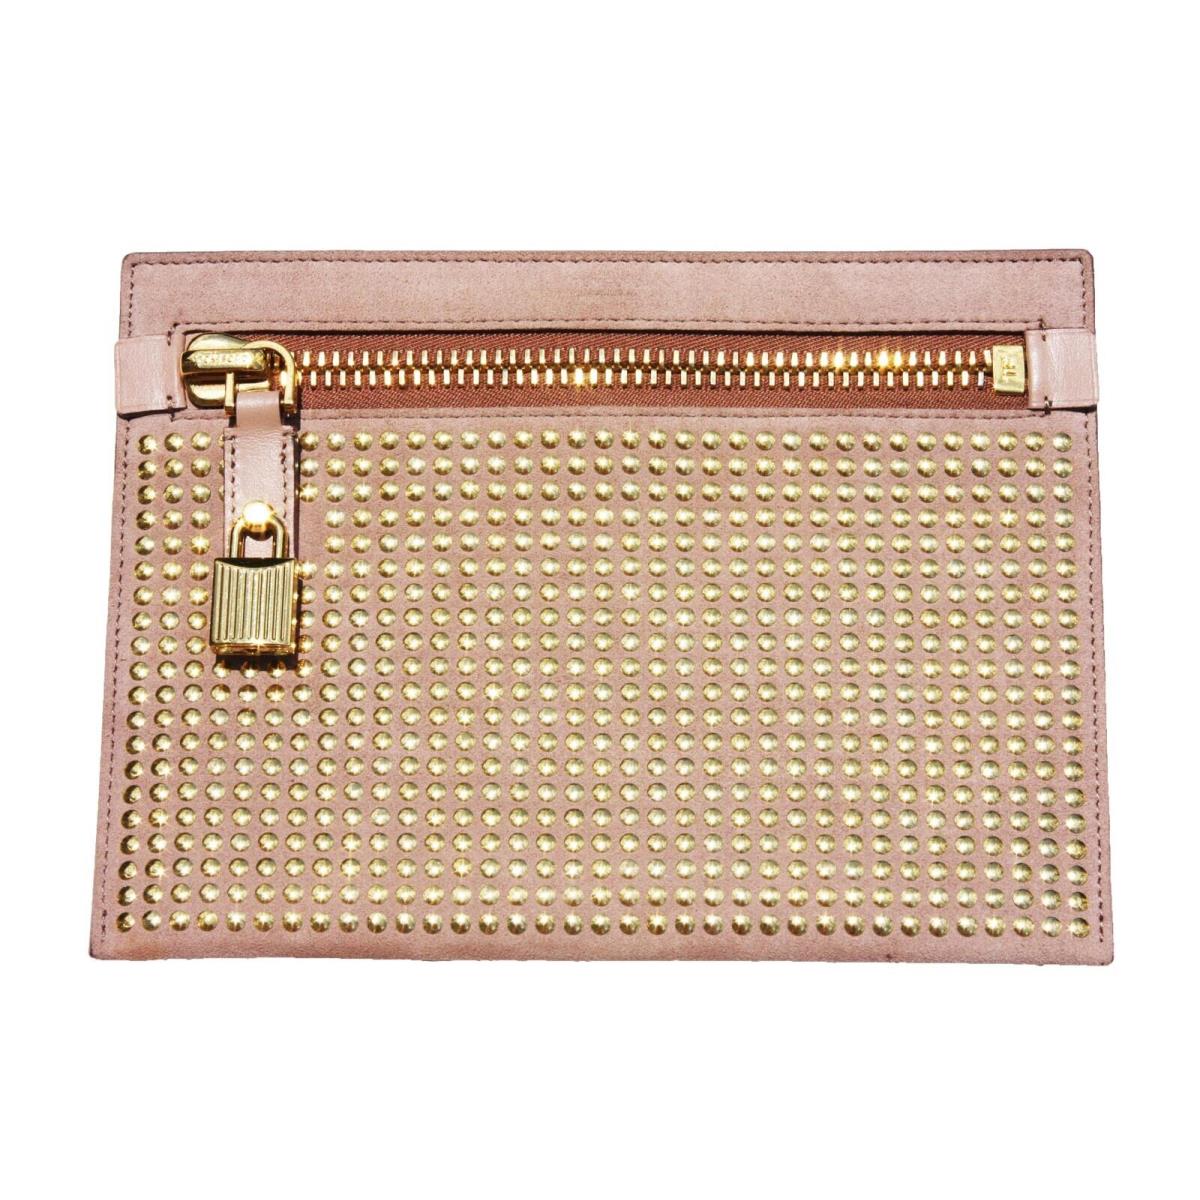 Tom Ford Alix Suede Tan/gold Studded Pouch Clutch Bag with Lock